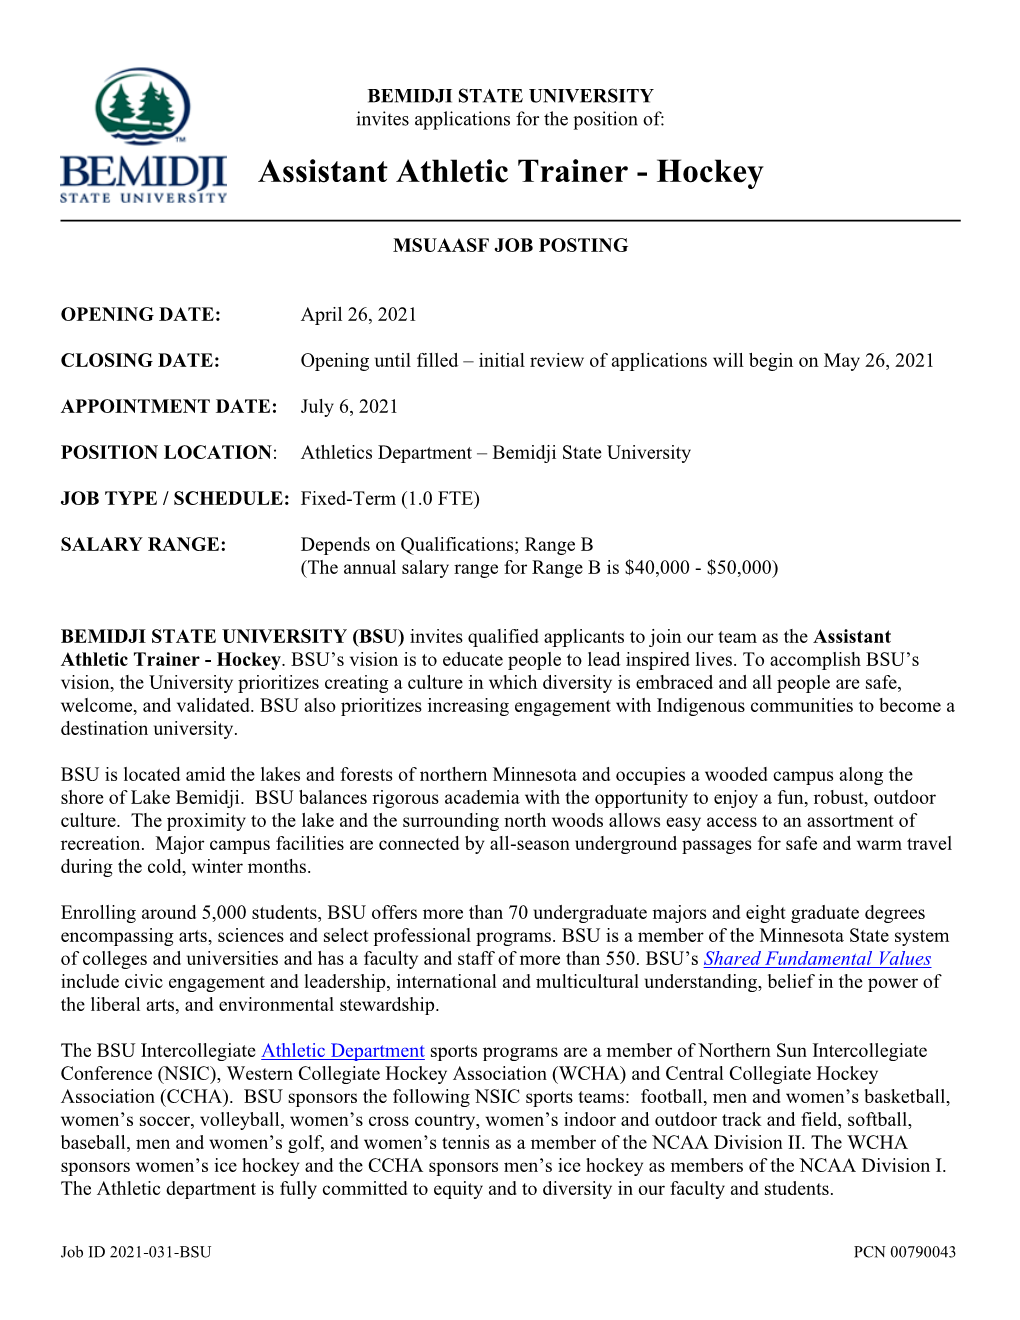 Assistant Athletic Trainer - Hockey